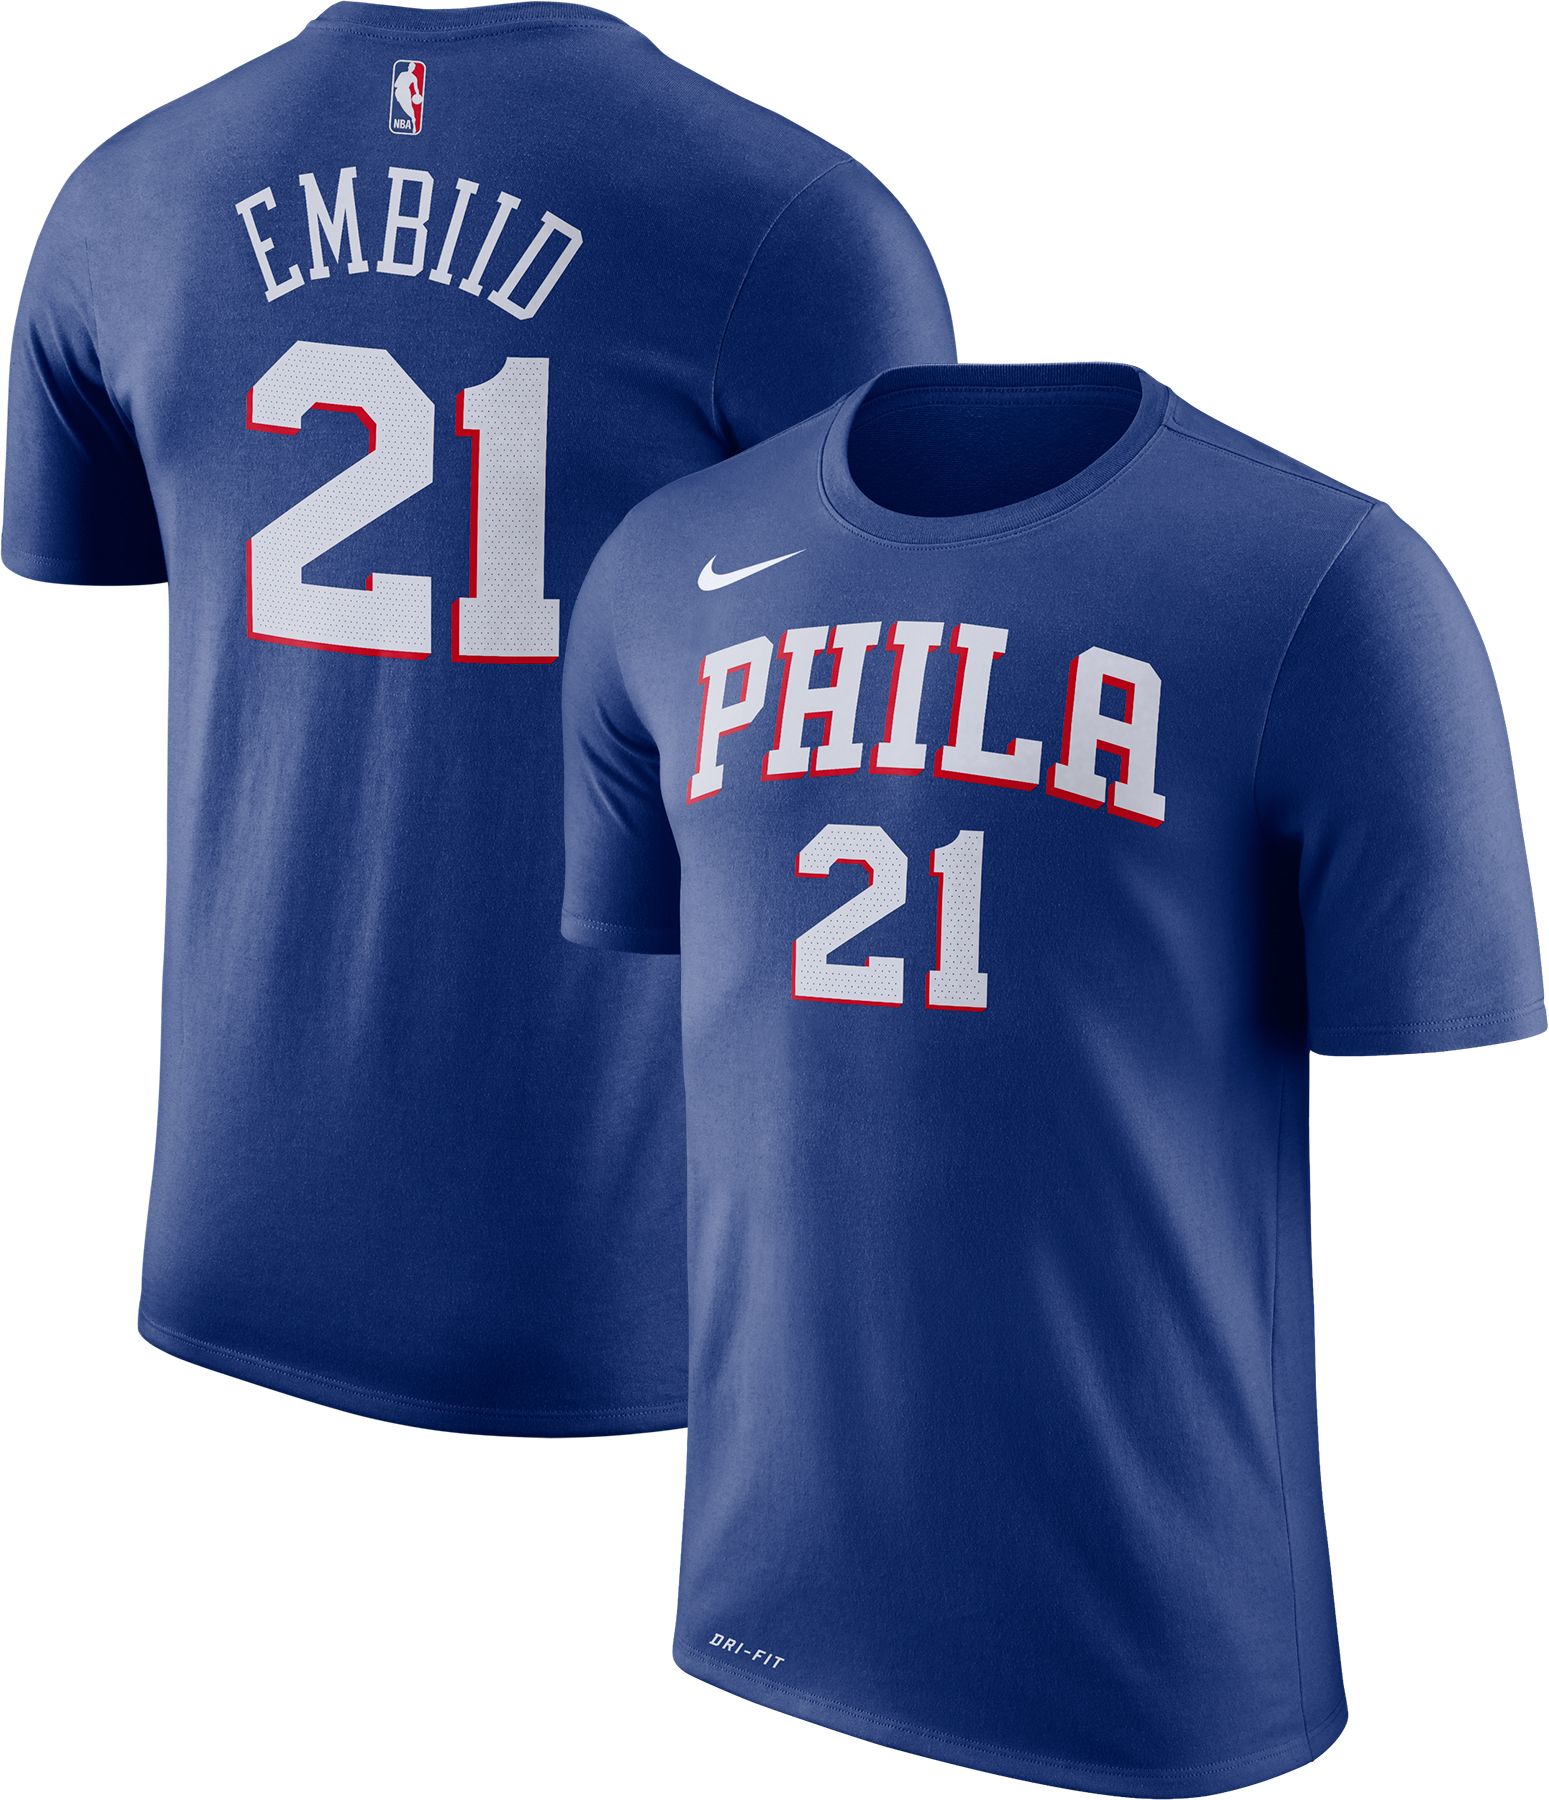 embiid youth jersey